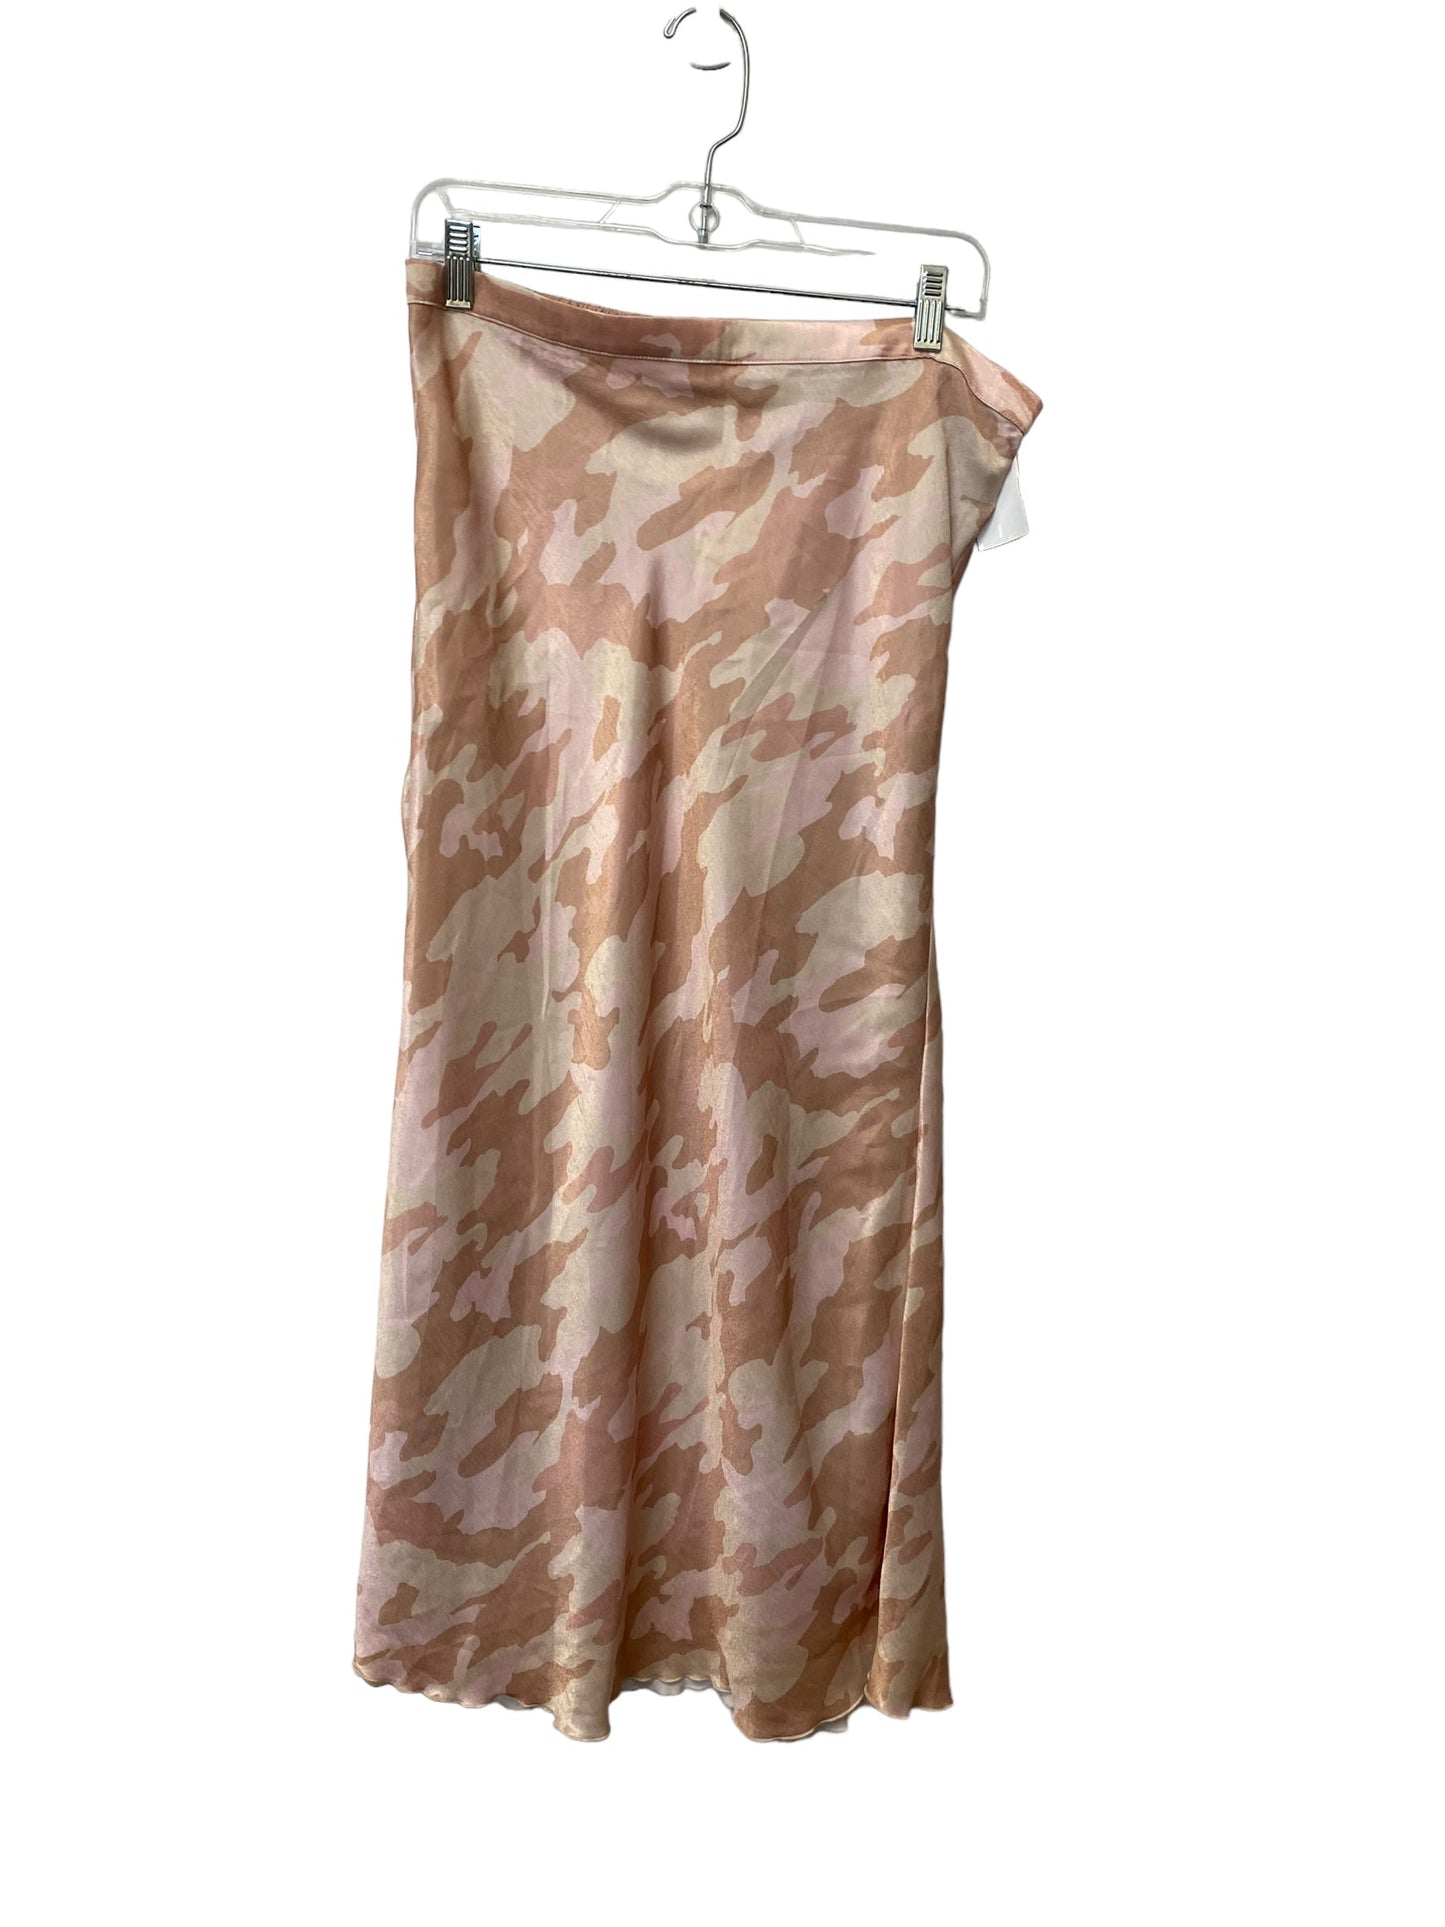 Pink Skirt Maxi Free People, Size L